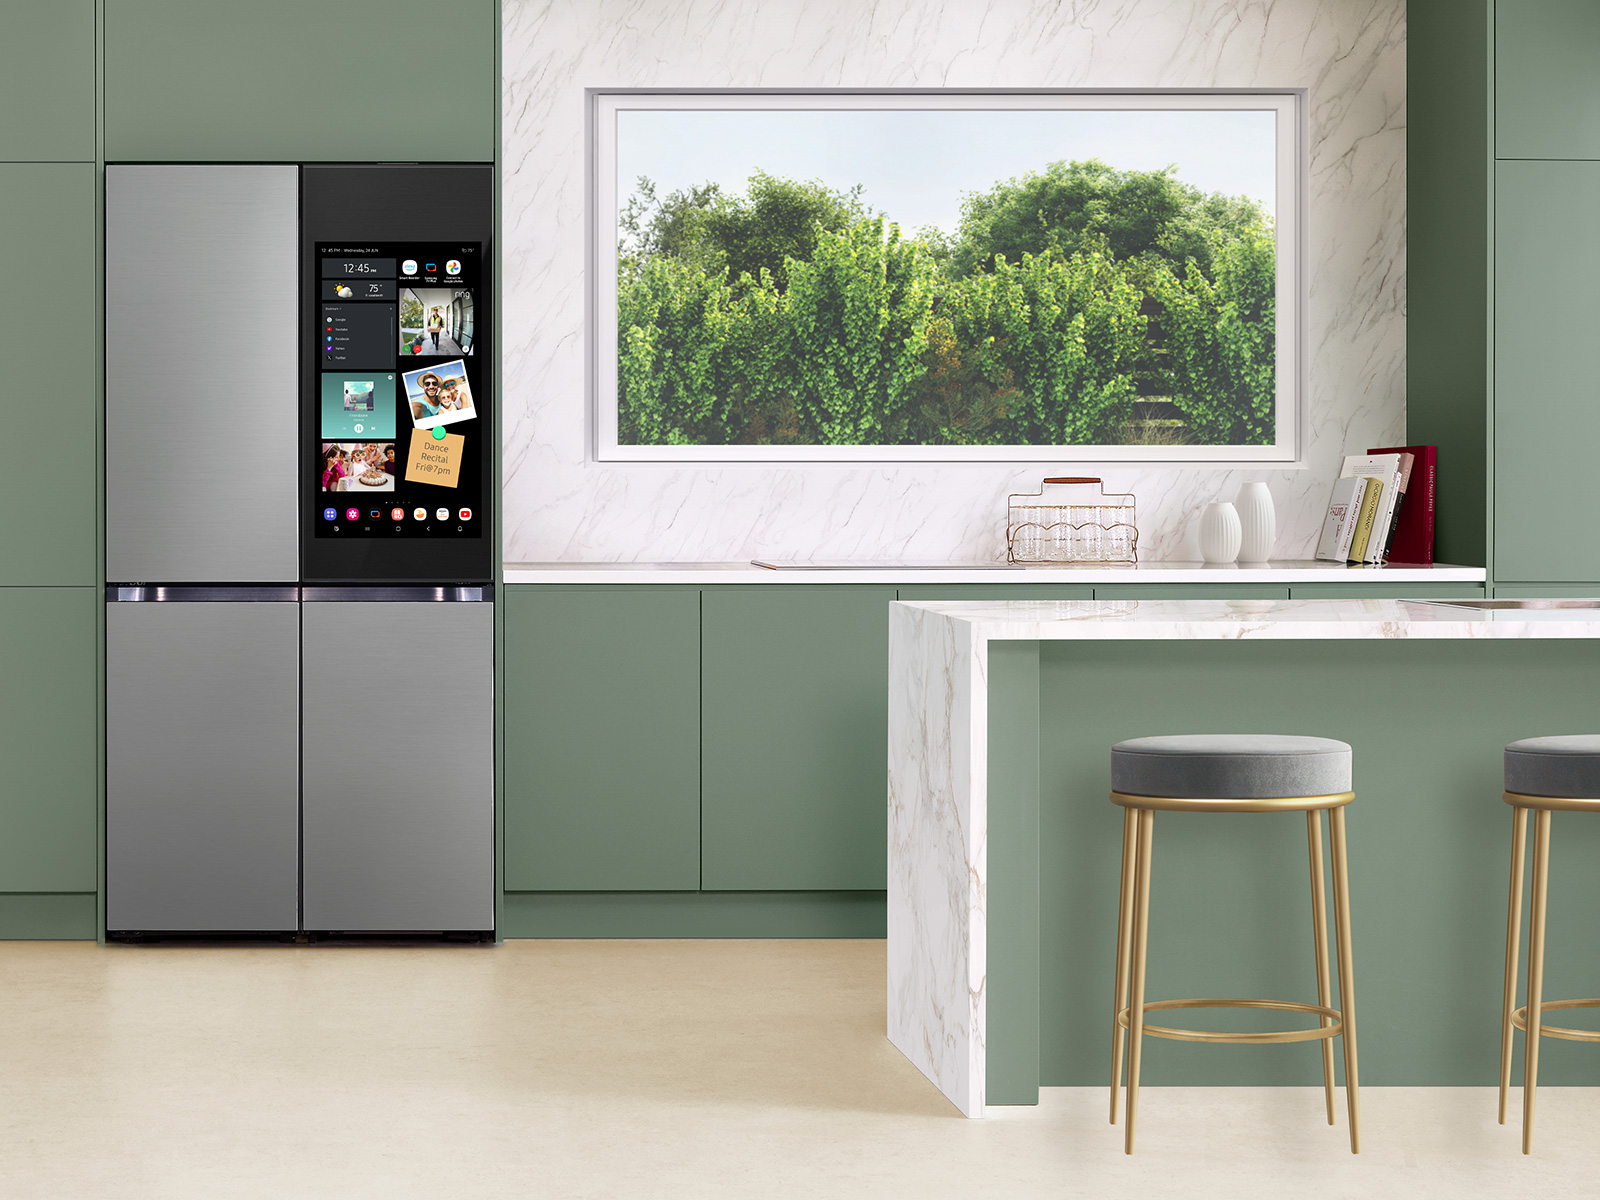 Thumbnail image of Bespoke 4-Door Flex™ Refrigerator (29 cu. ft.) with AI Family Hub™+ and AI Vision Inside™ in Stainless Steel